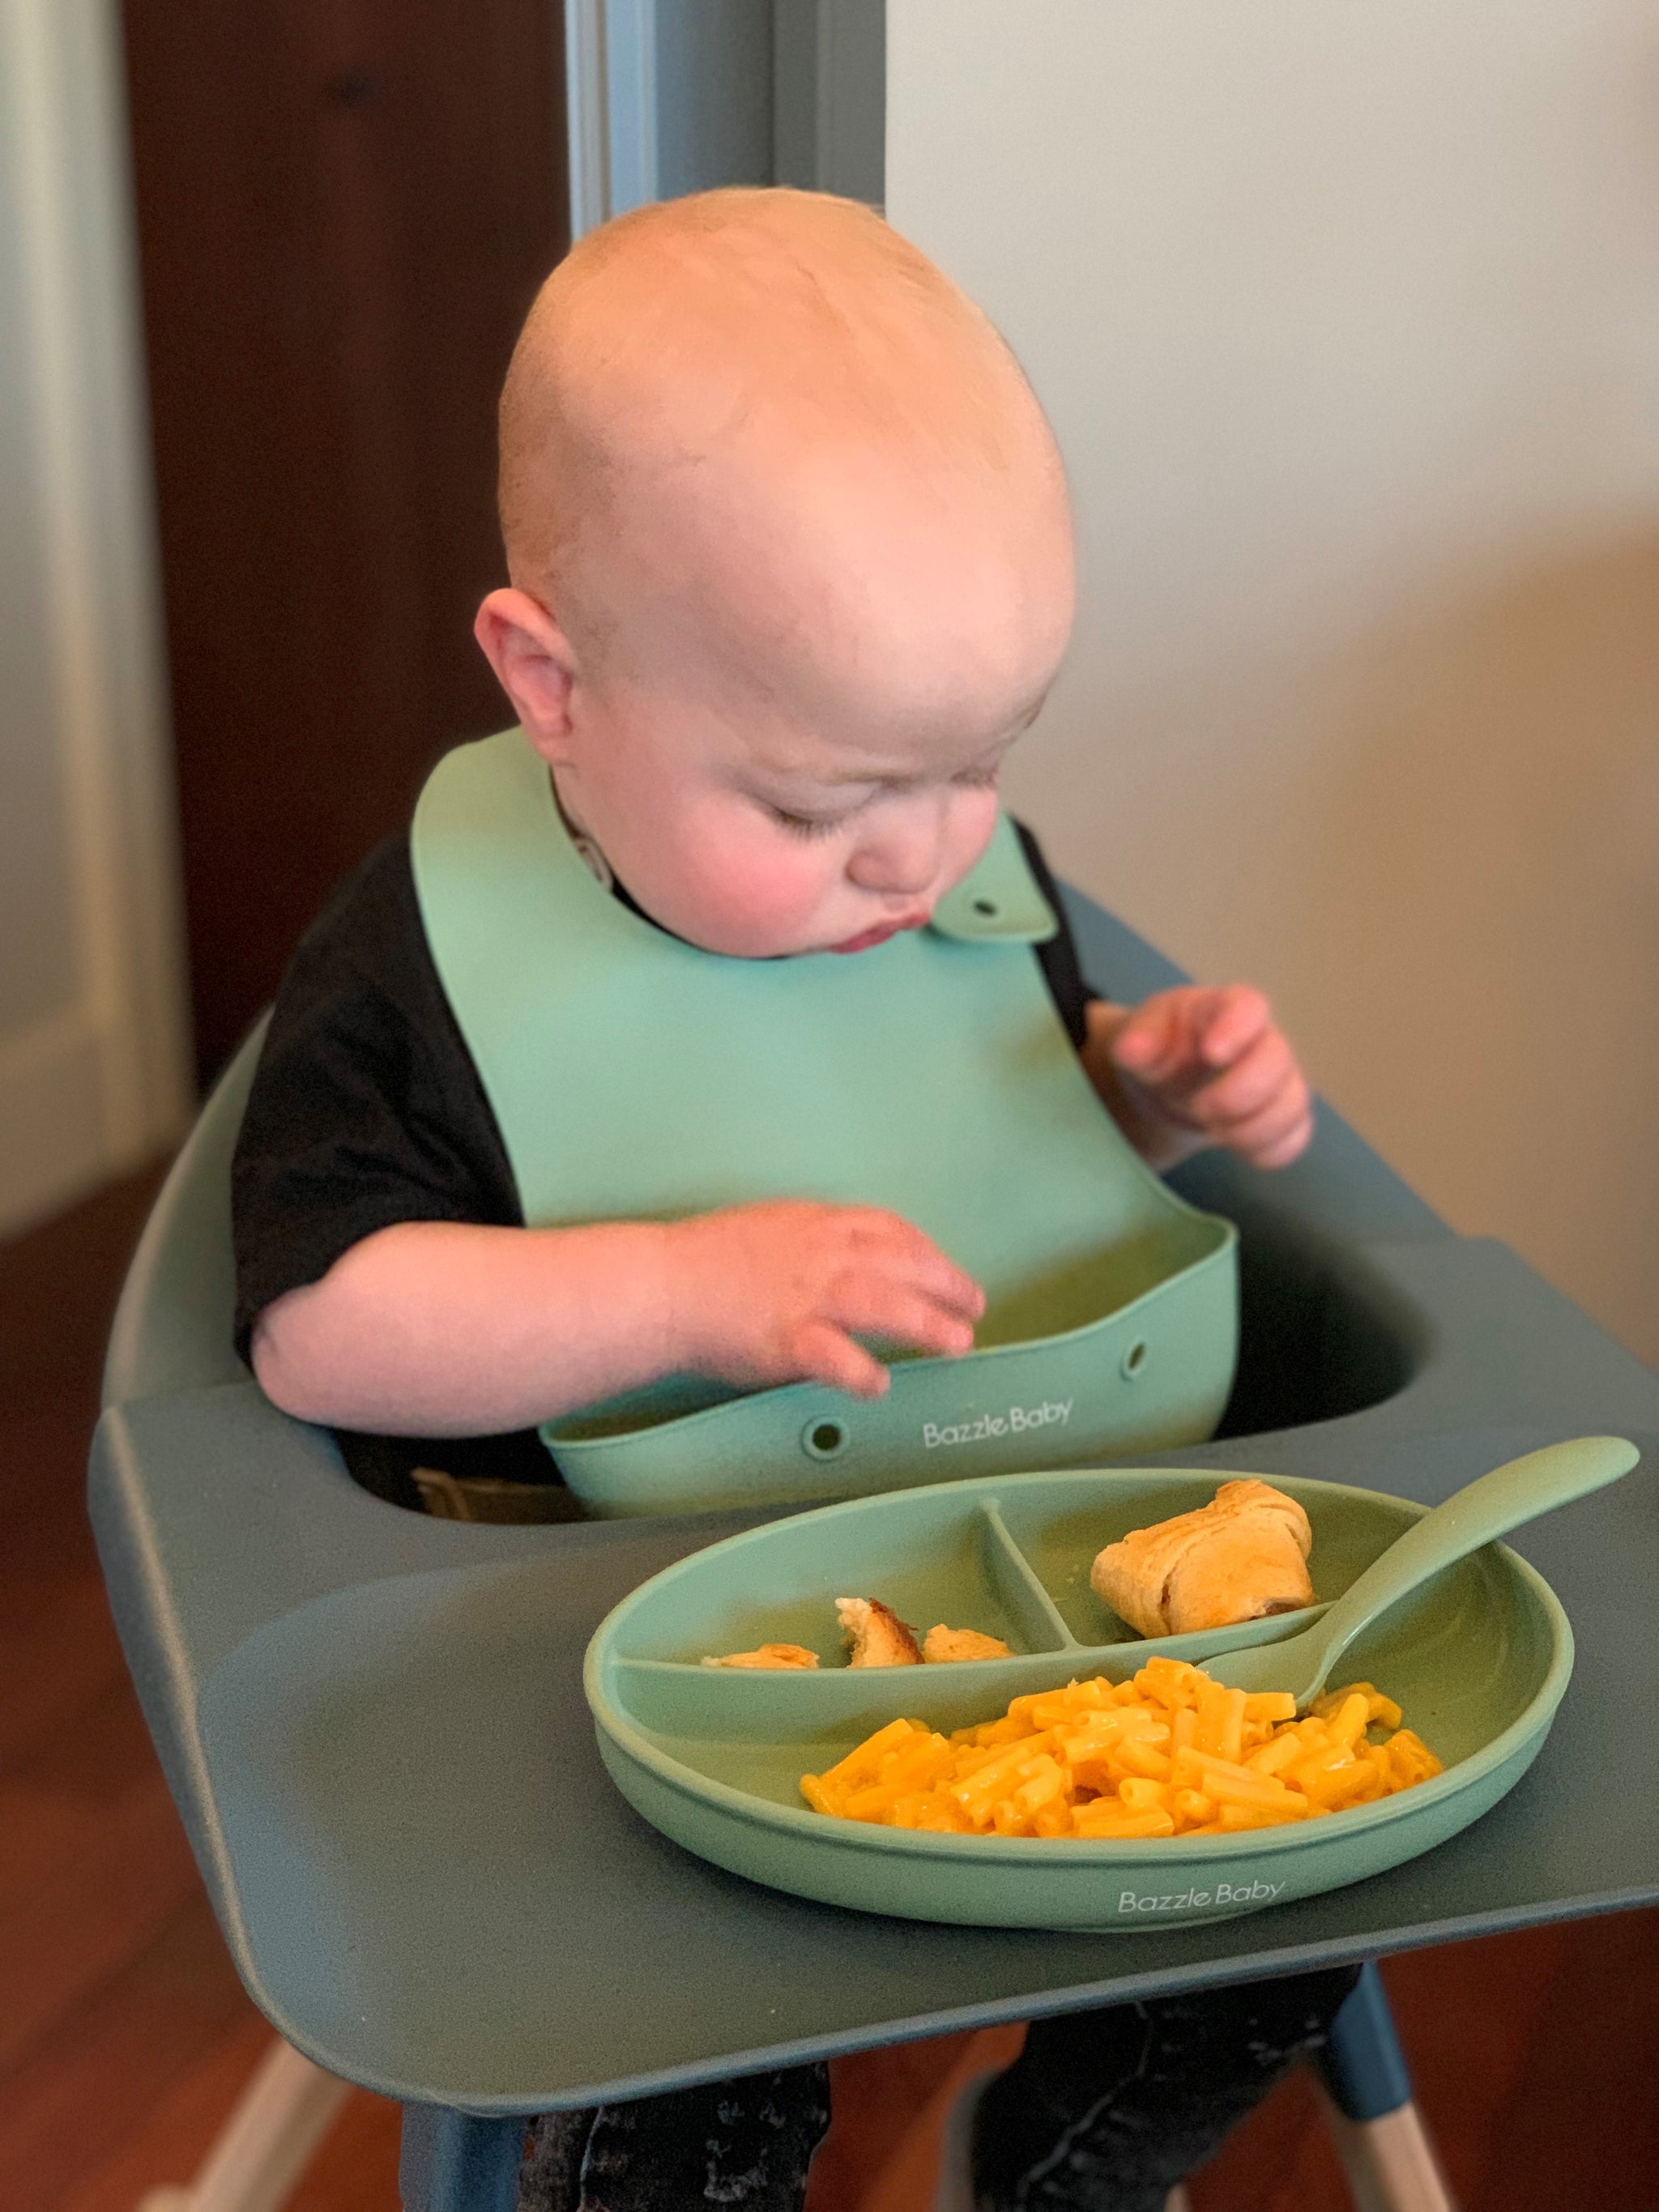 Bazzle Baby Foodie Feeding Set: Silicone Bib, Plate, Bowl, Lid and